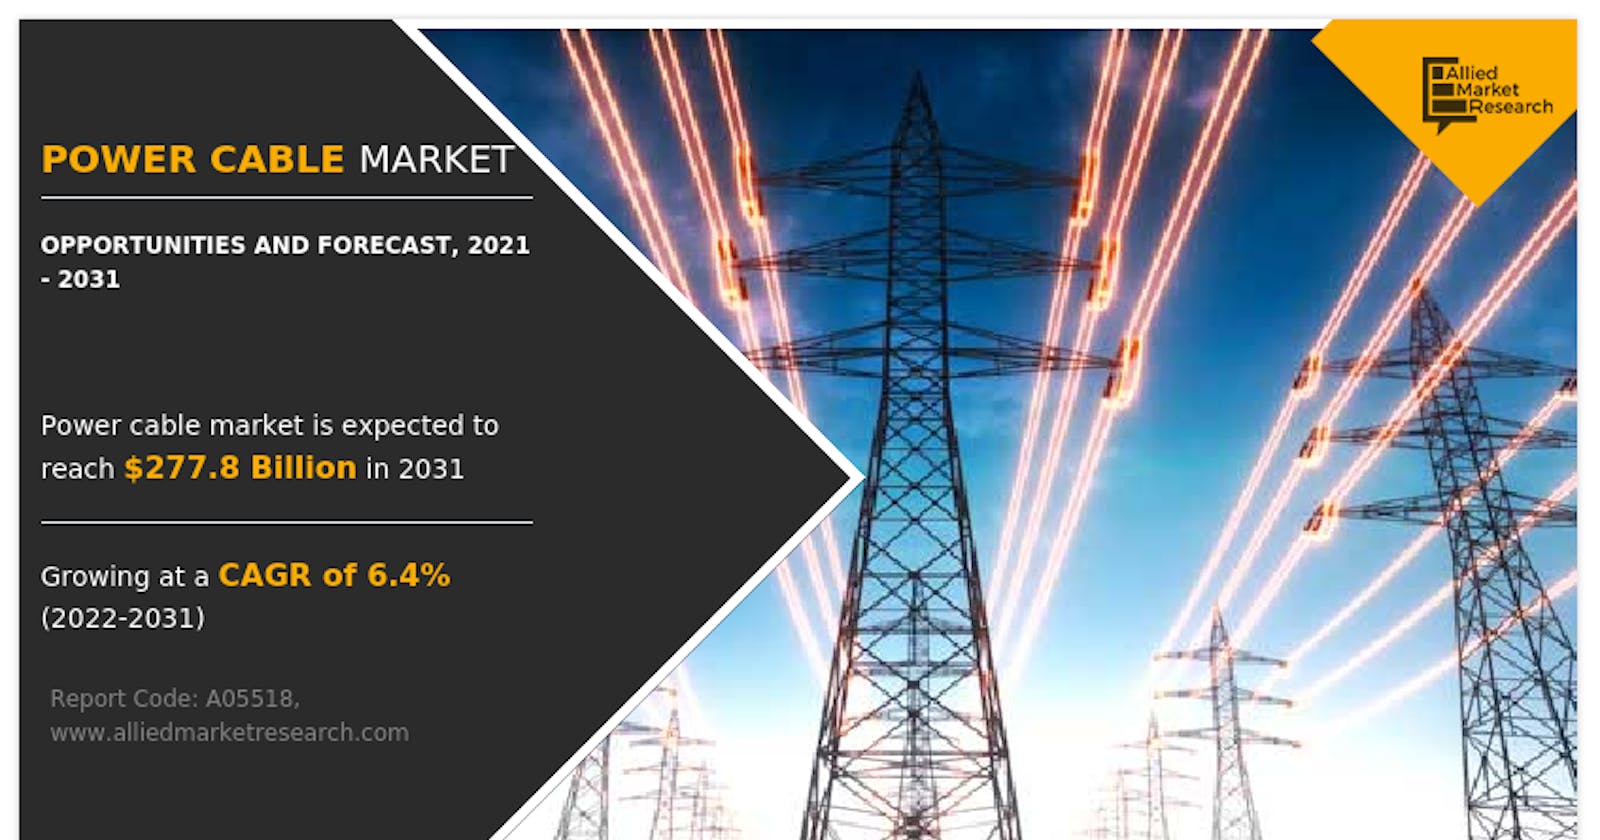 Power Cable Market: Key Findings and Investment Pockets 2021-2031